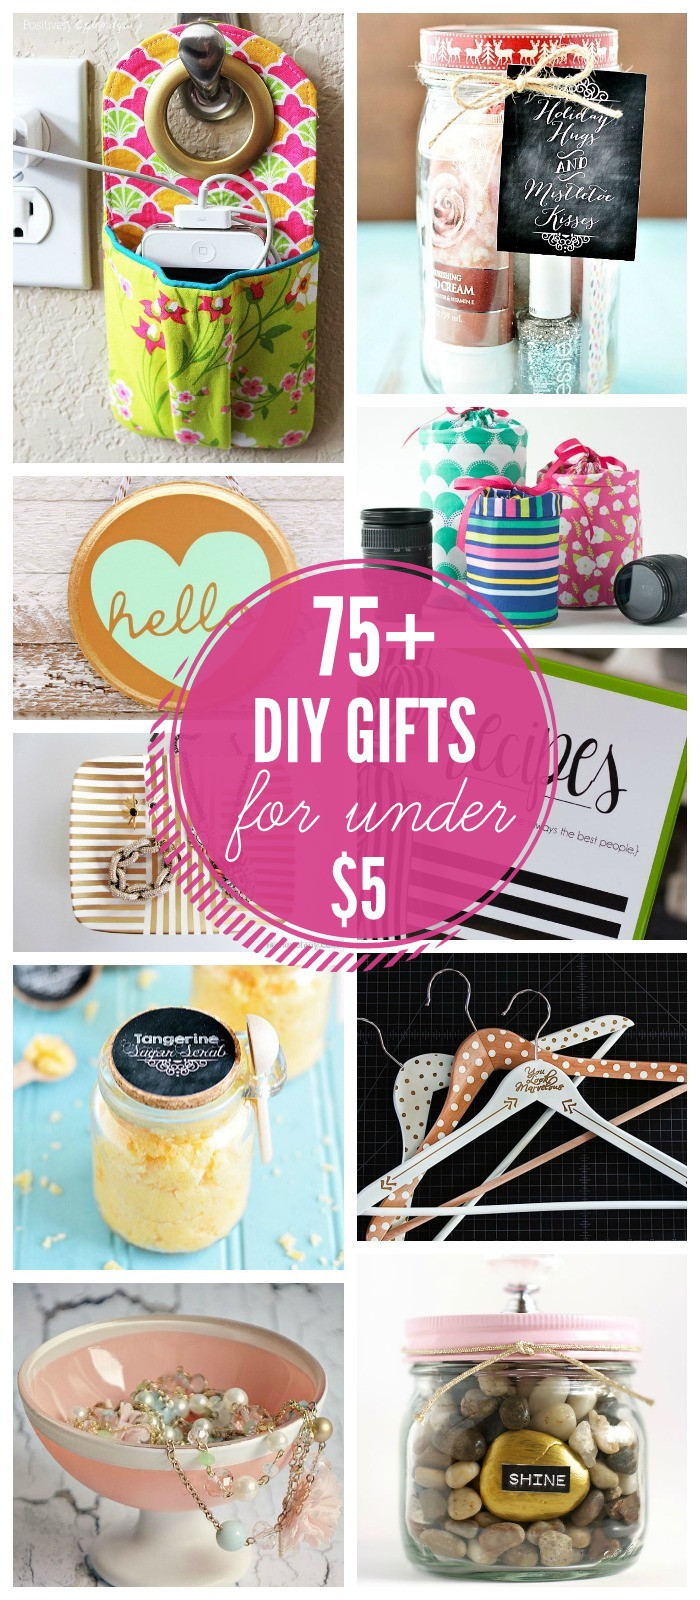 Great DIY Christmas Gifts
 75 Gift Ideas under $5